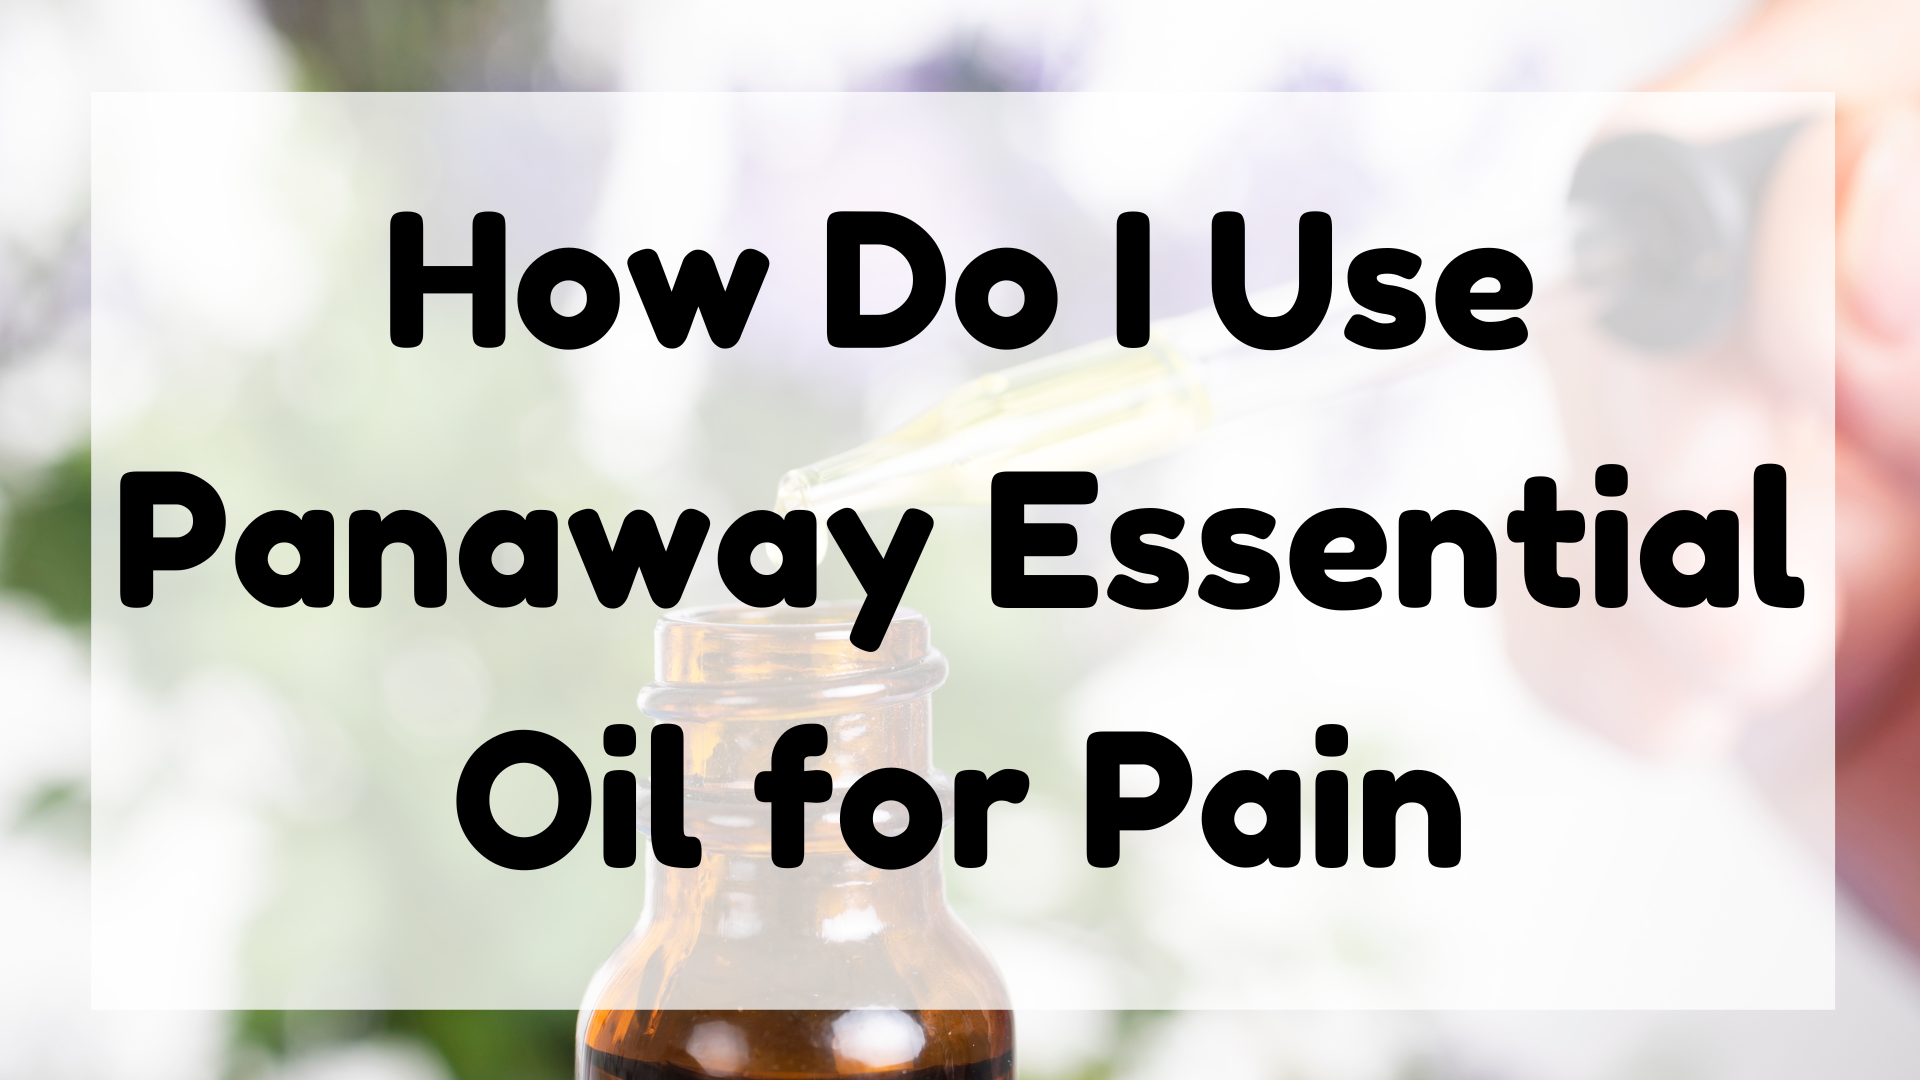 How Do I Use Panaway Essential Oil for Pain featured image